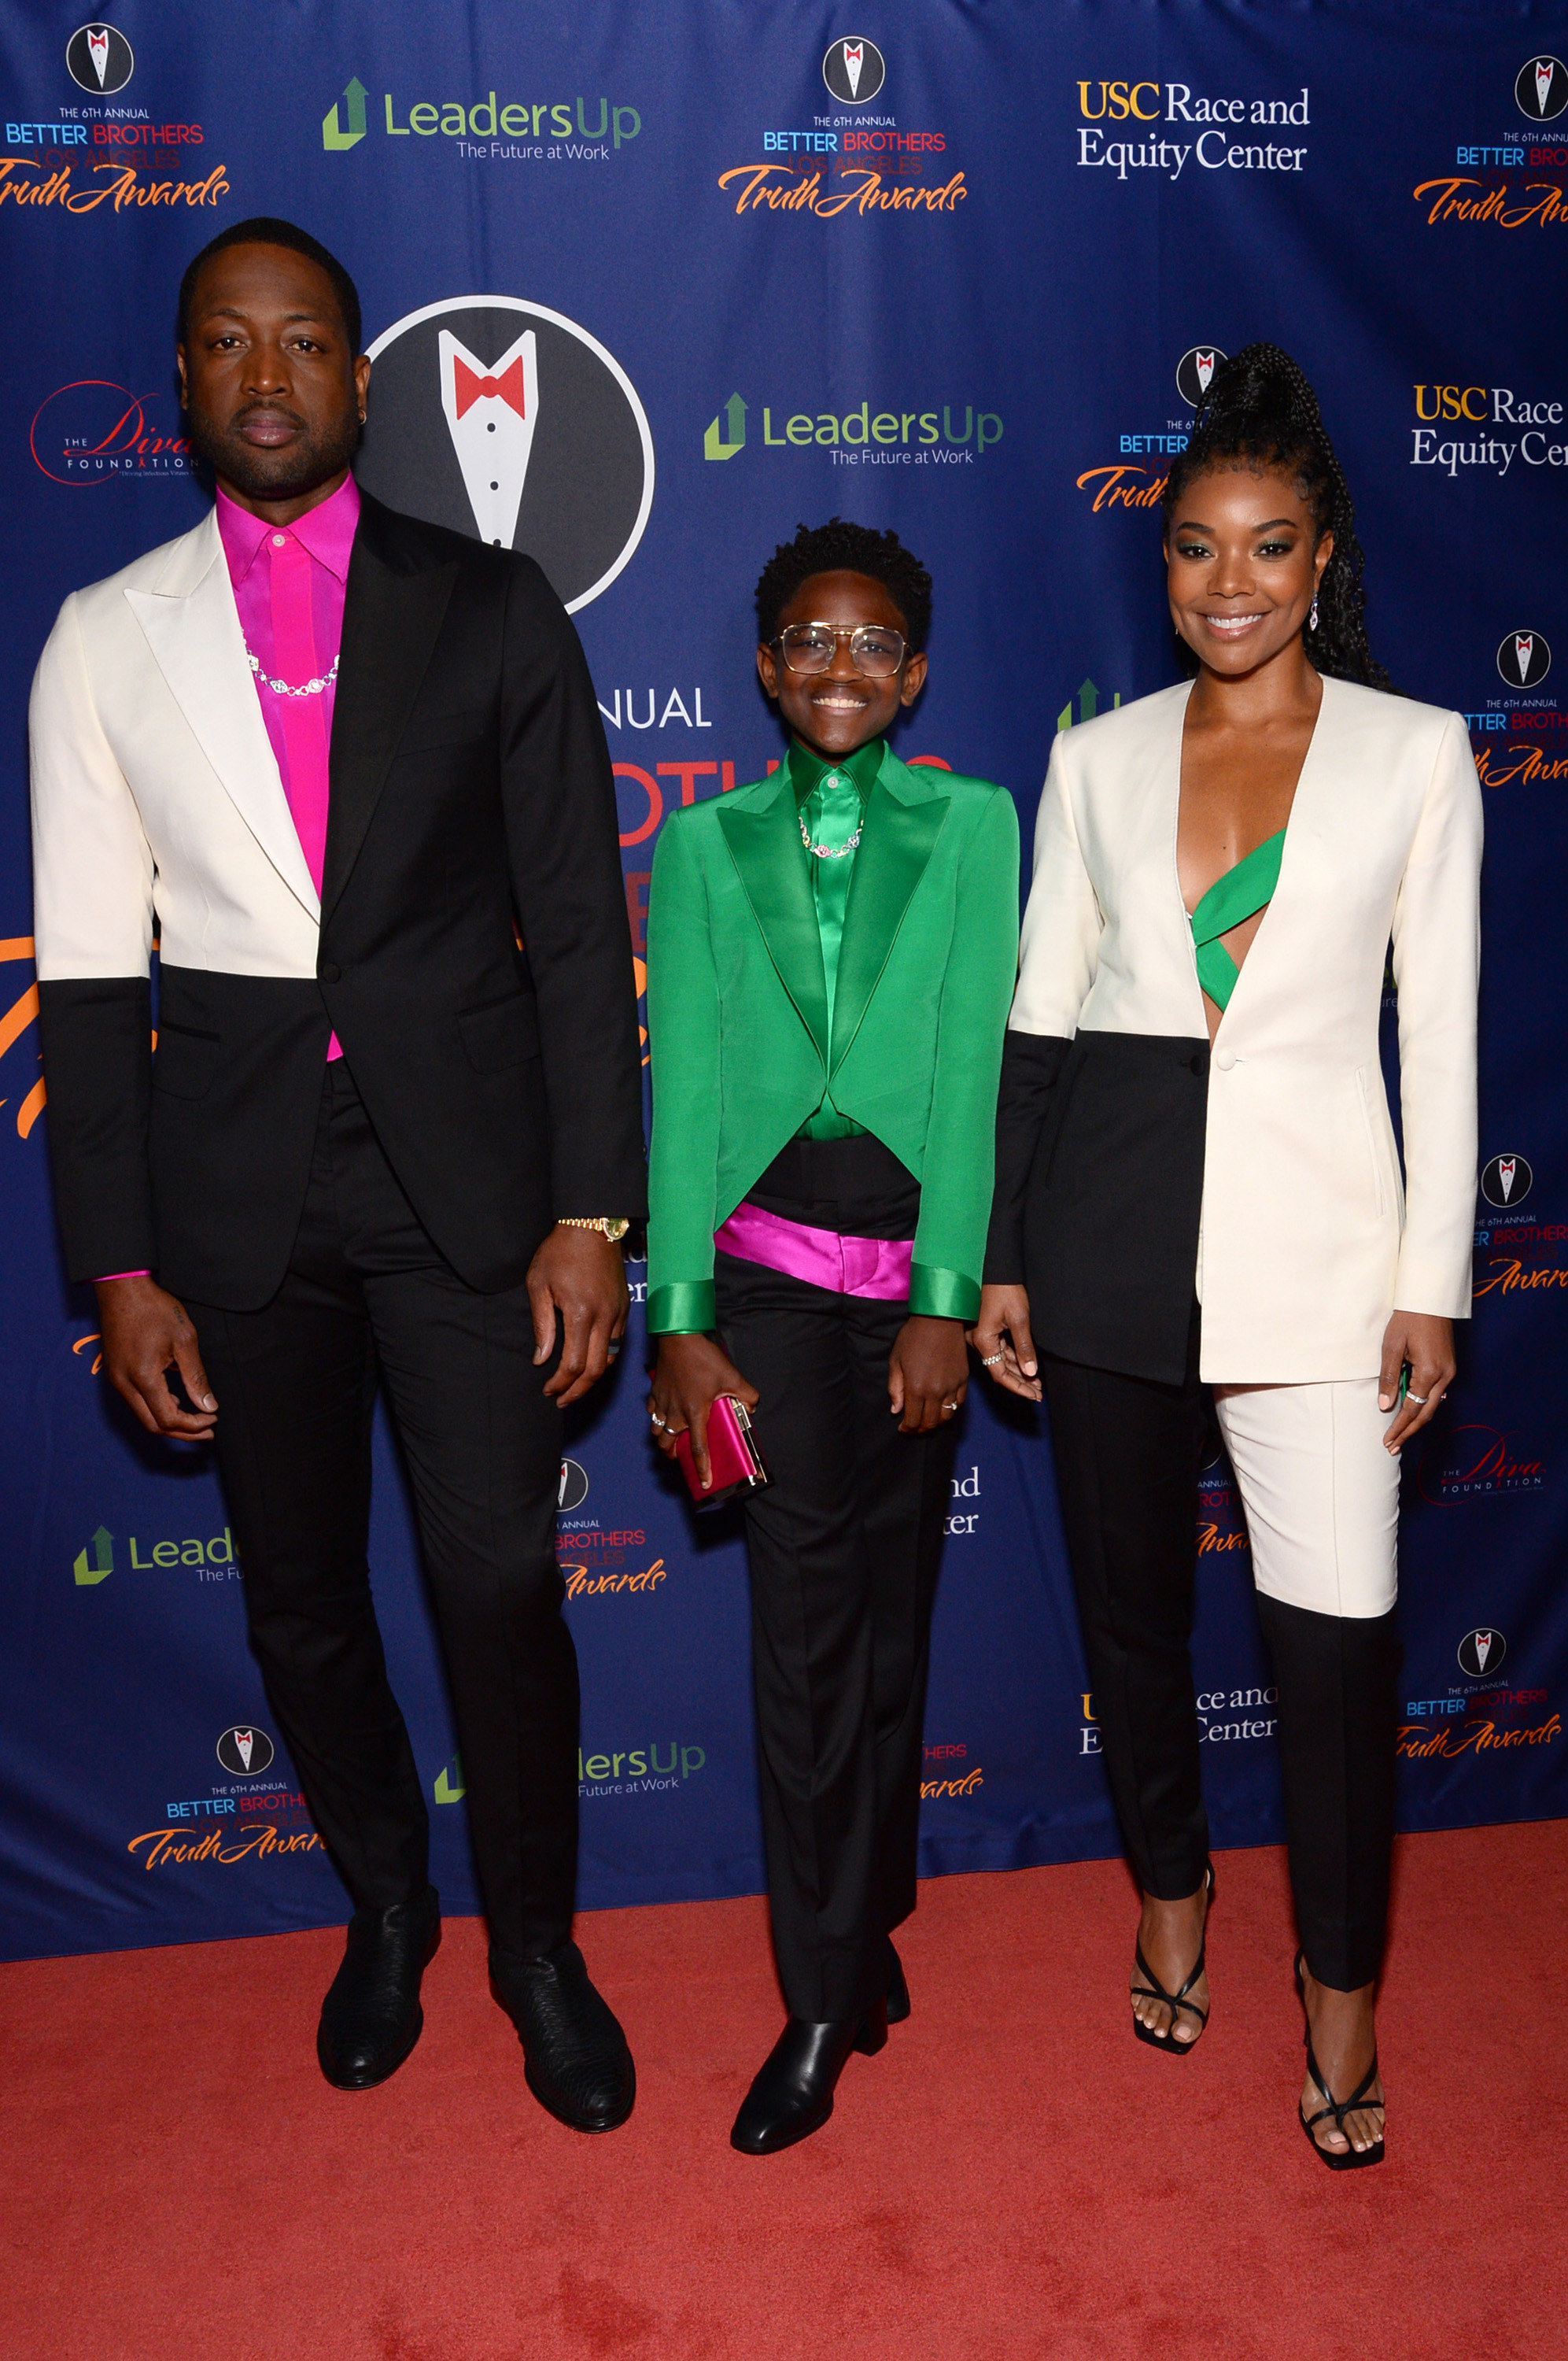 The couple posing with Dwyane&#x27;s daughter Zaya at a red carpet event